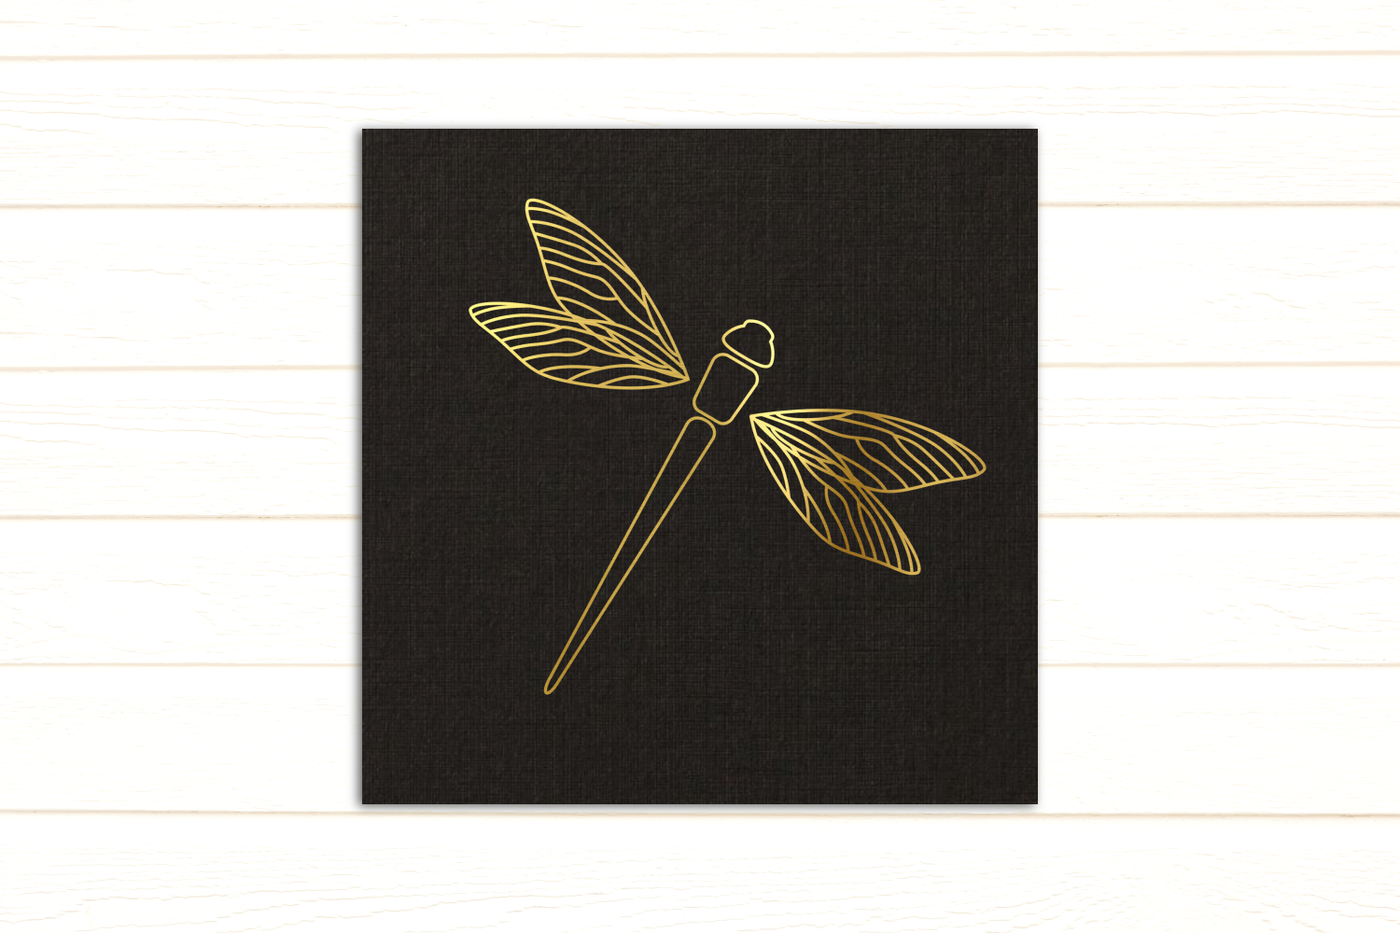 A black piece of paper with the line drawing of a dragonfly with detailed wings. The dragonfly is in gold foil.